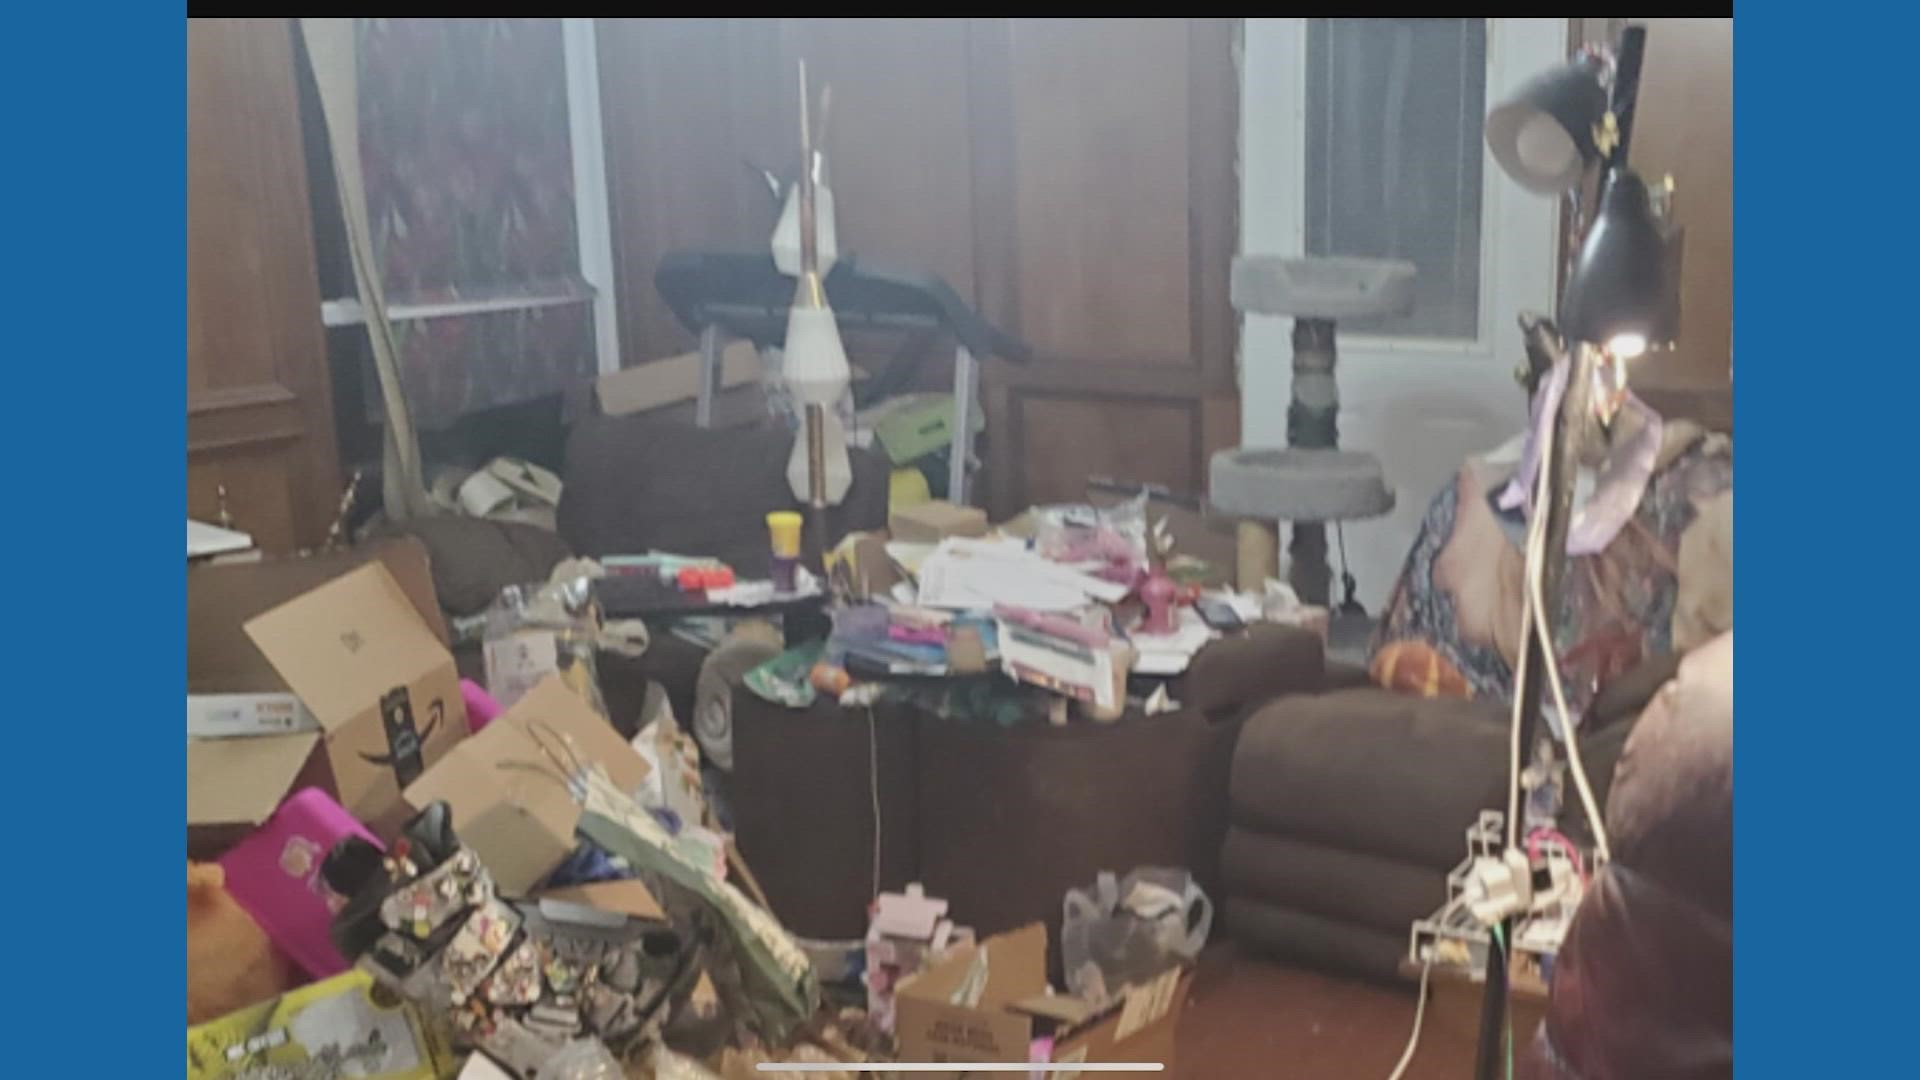 Authorities say they rescued a 7-year-old girl from dangerous and deplorable conditions during an undercover operation at a home in Spring.